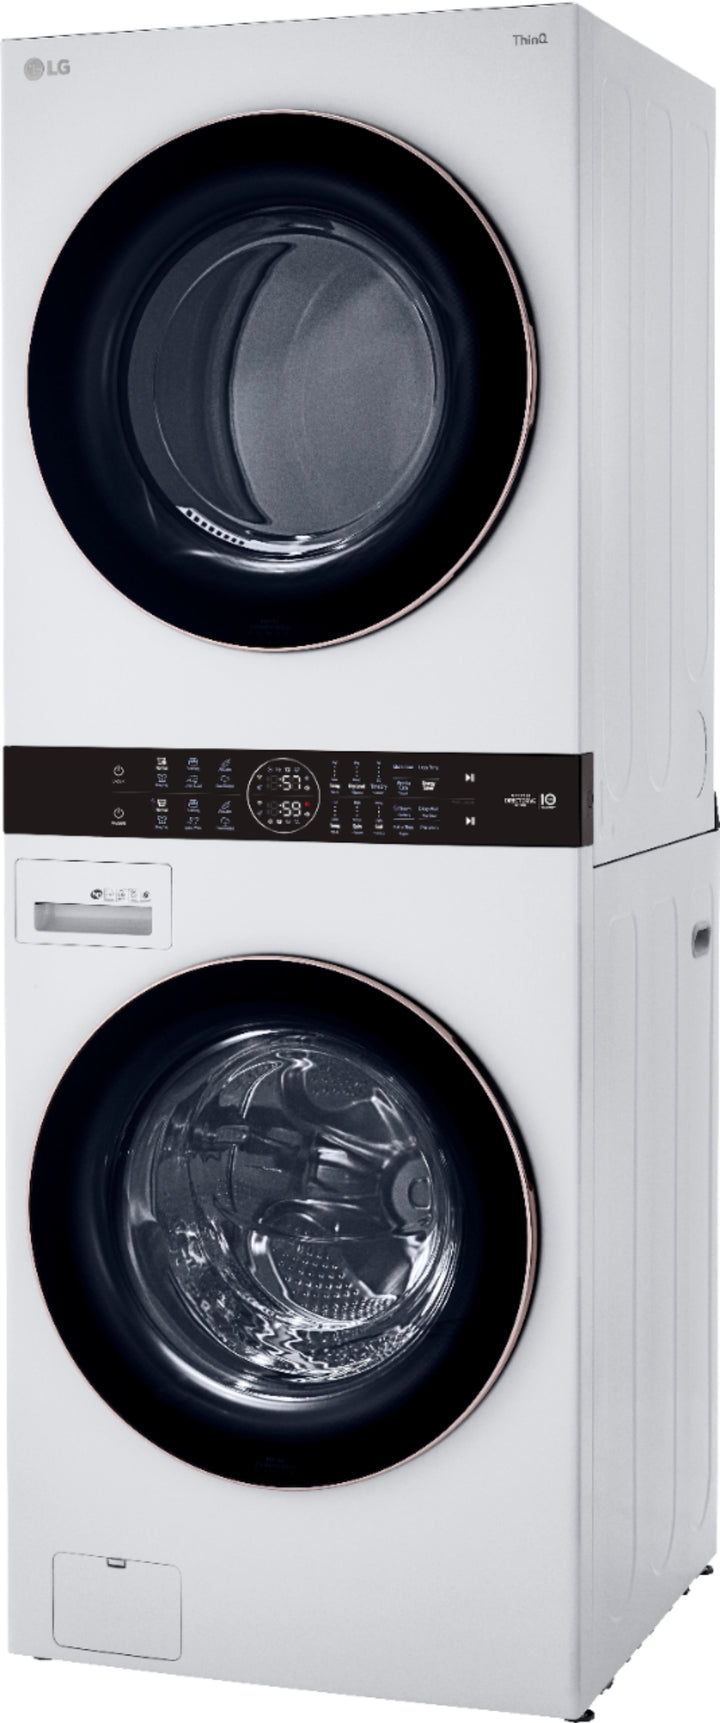 LG - 4.5 Cu. Ft. HE Smart Front Load Washer and 7.4 Cu. Ft. Electric Dryer WashTower with Built-In Intelligence - White_10